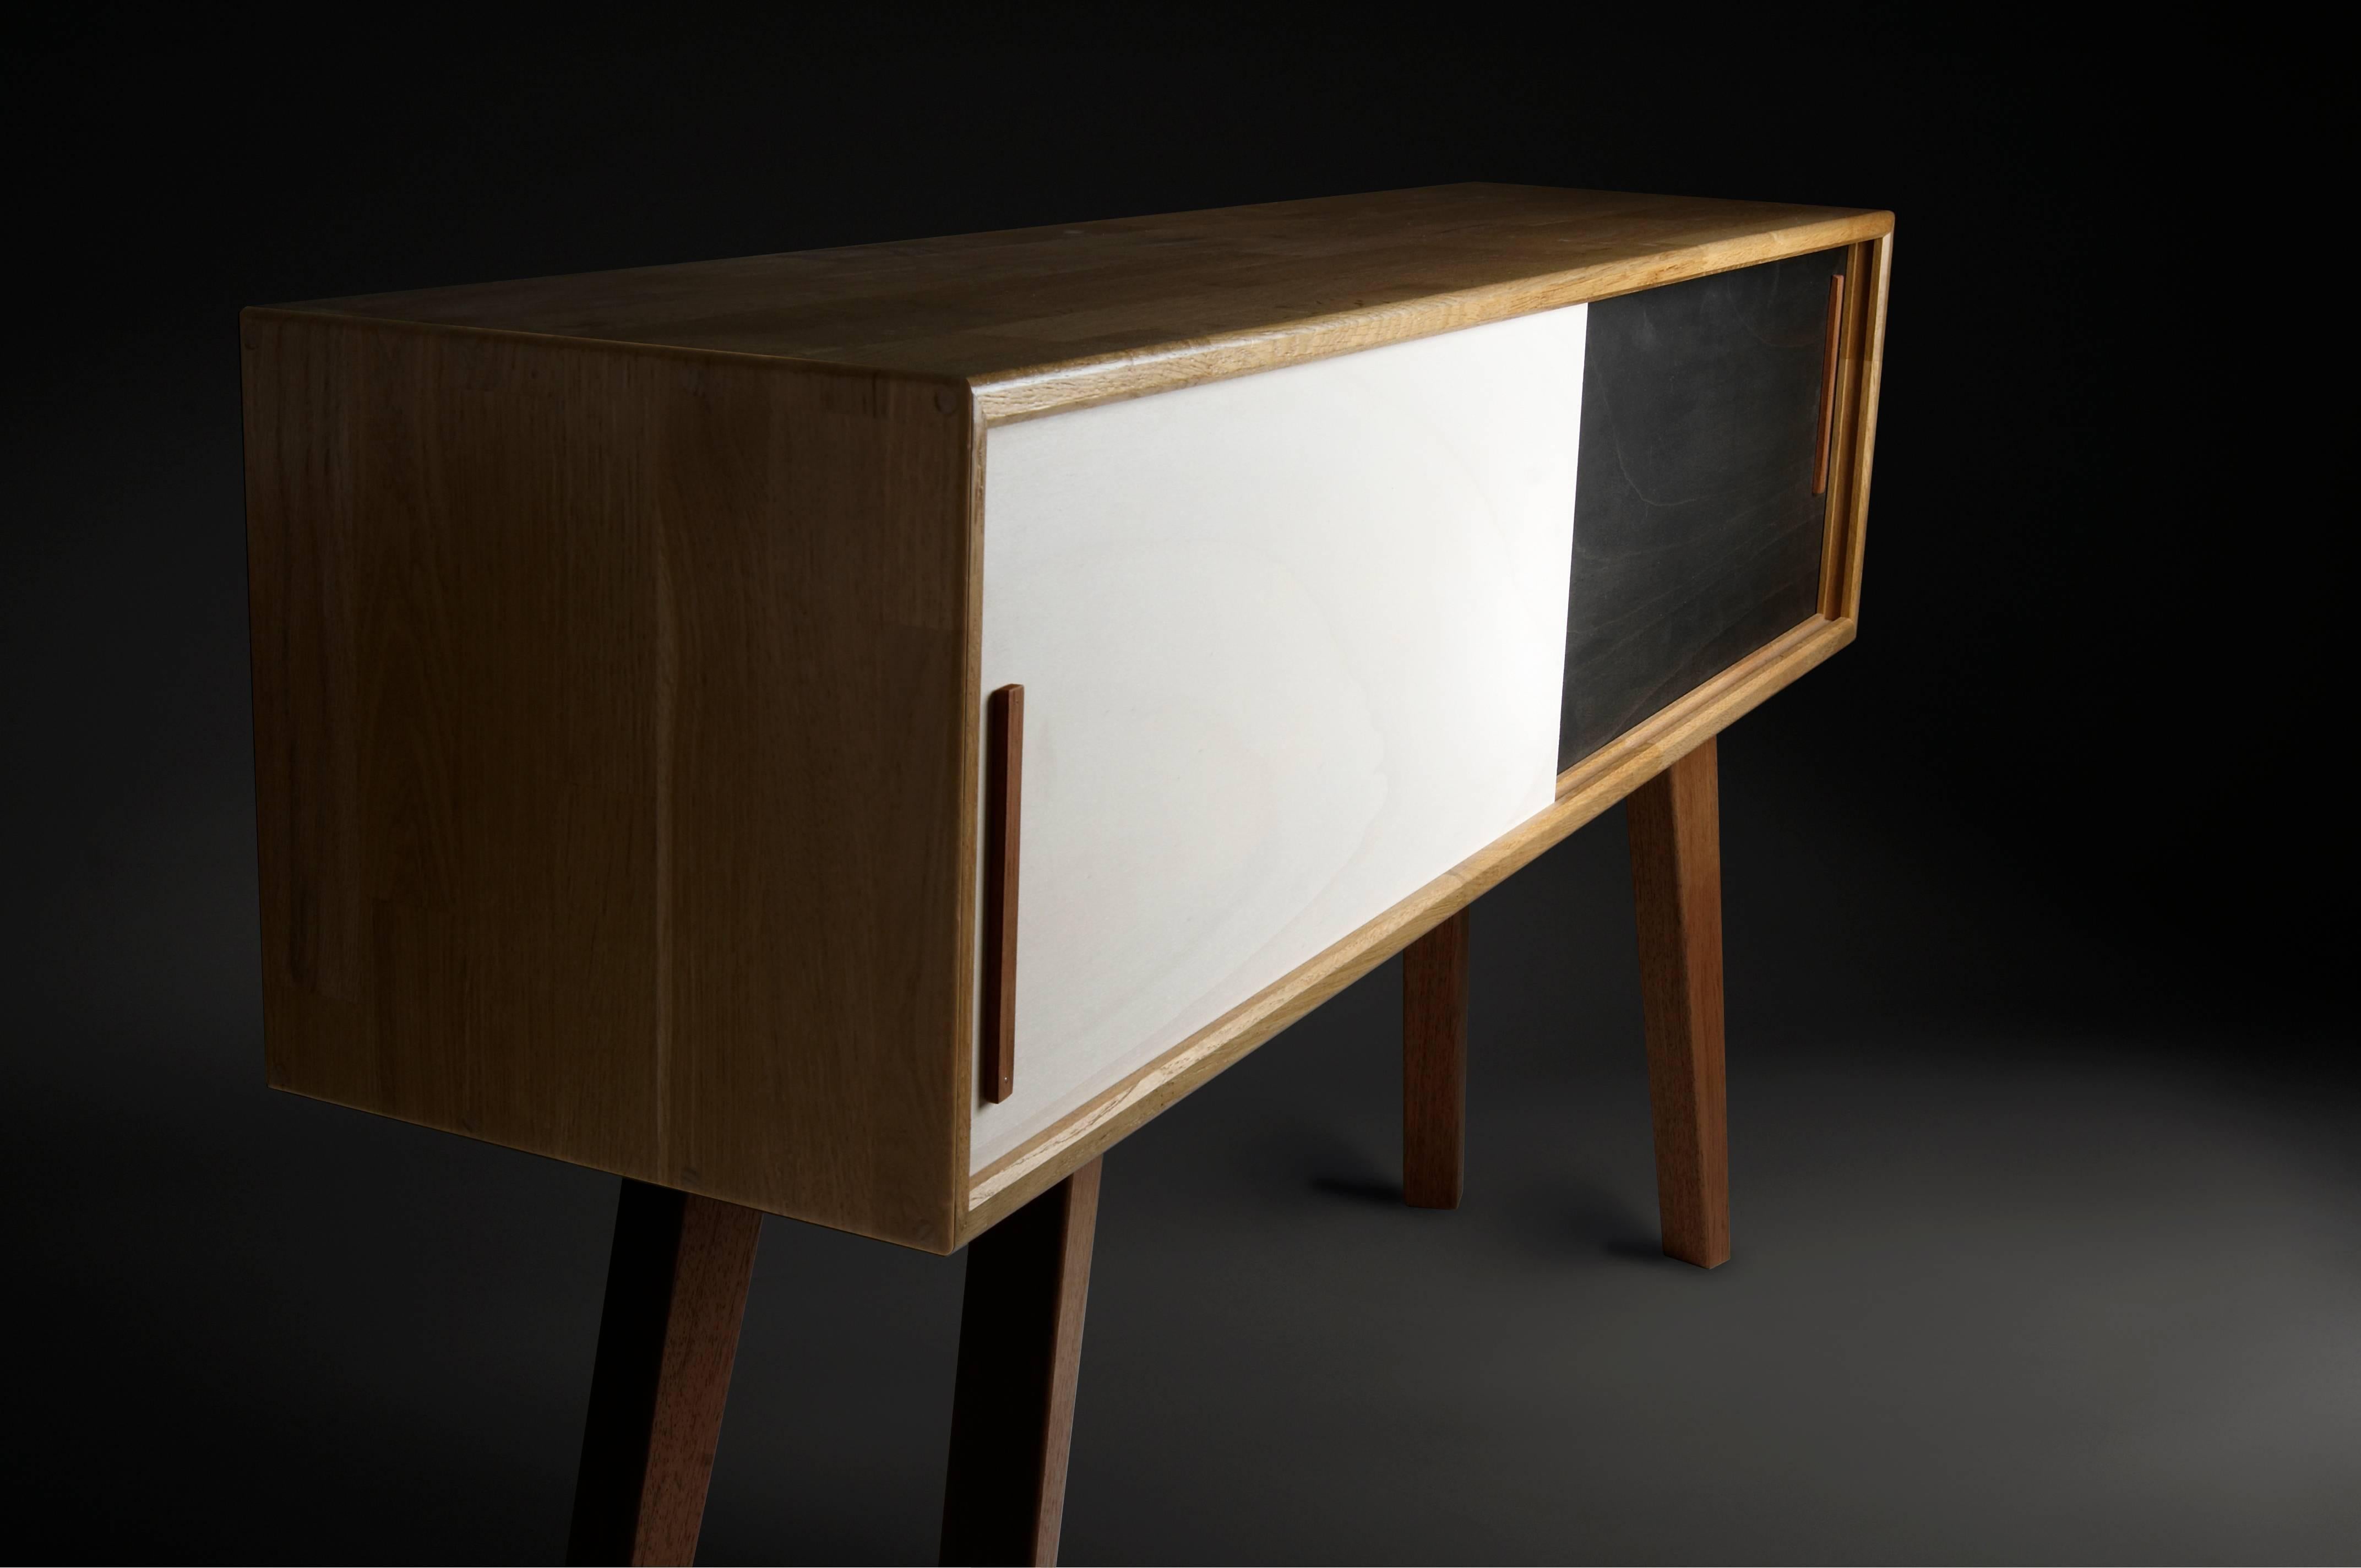 Sideboard cabinet in solid oak with sliding doors, elegance and purity of the lines,
for this ornamental furniture with irreproachable finishes,
black and white facade.
Ecological varnish.
Designed and manufactured by Julien Ebeniste